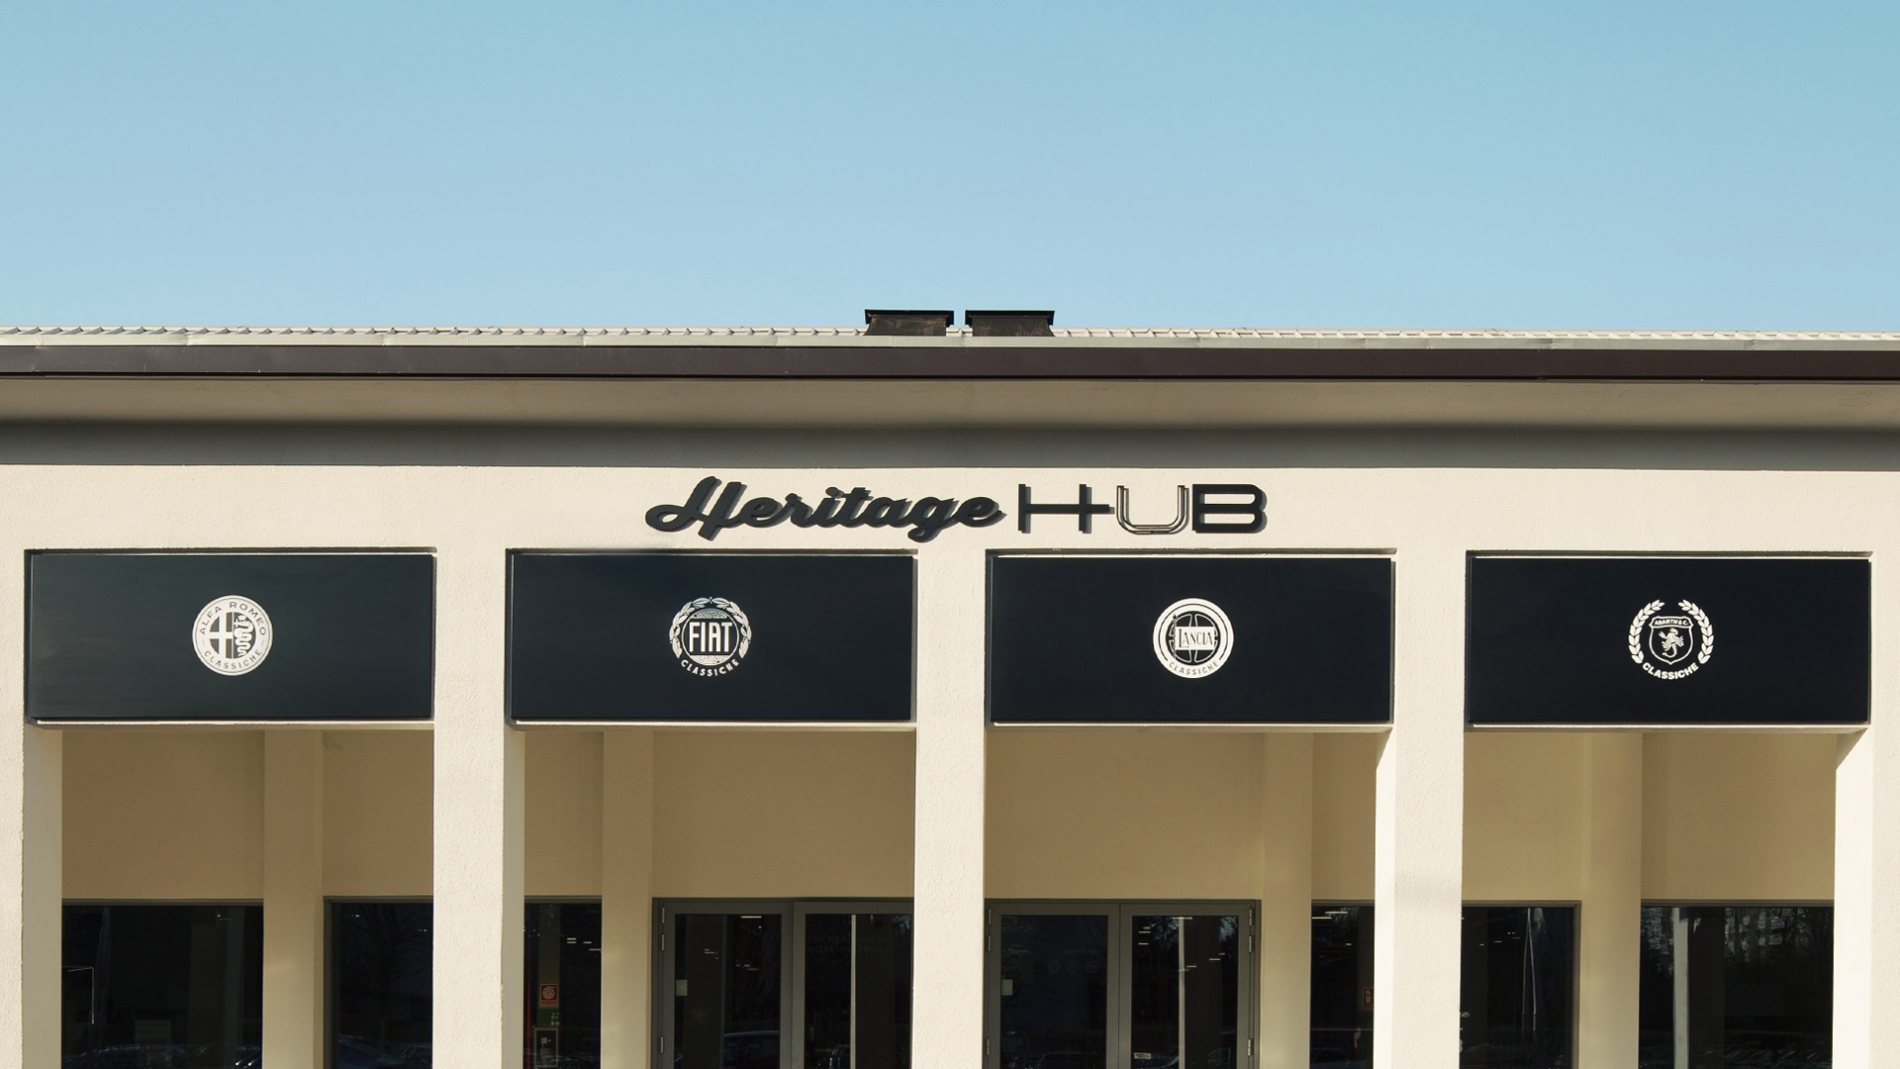 FCA Heritage HUB, where the history becomes the future